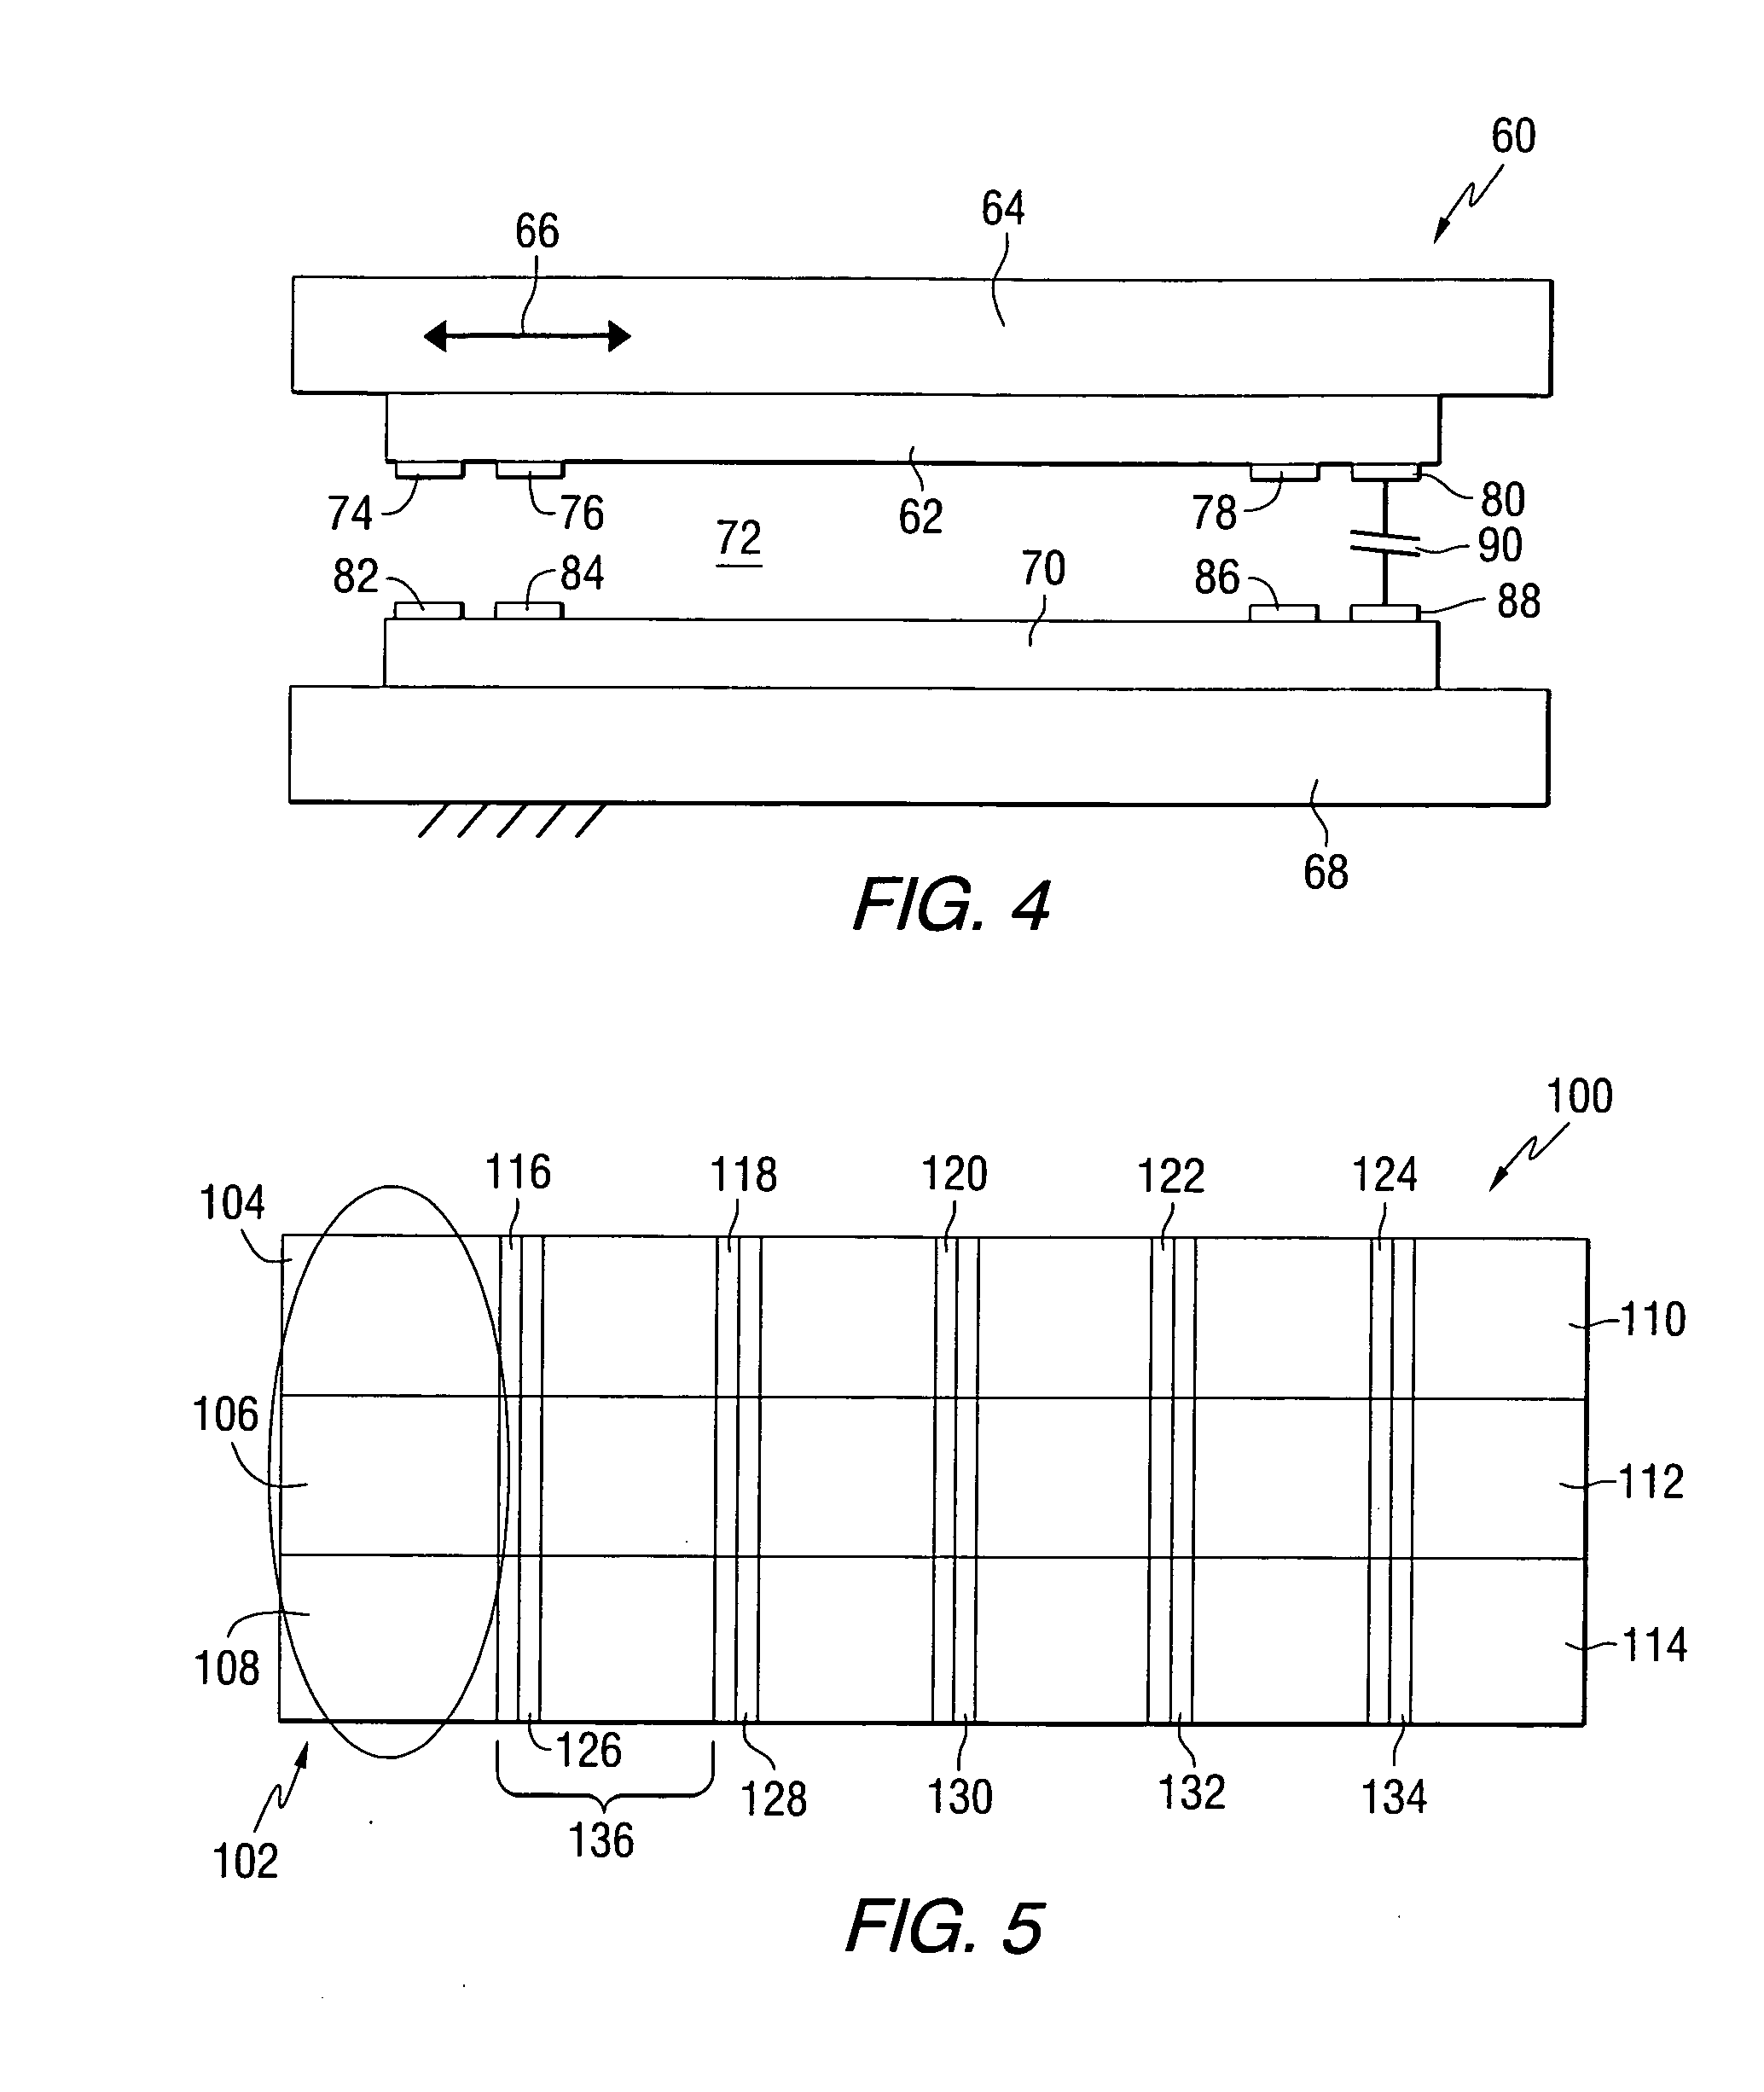 Elevated electrodes for probe position sensing